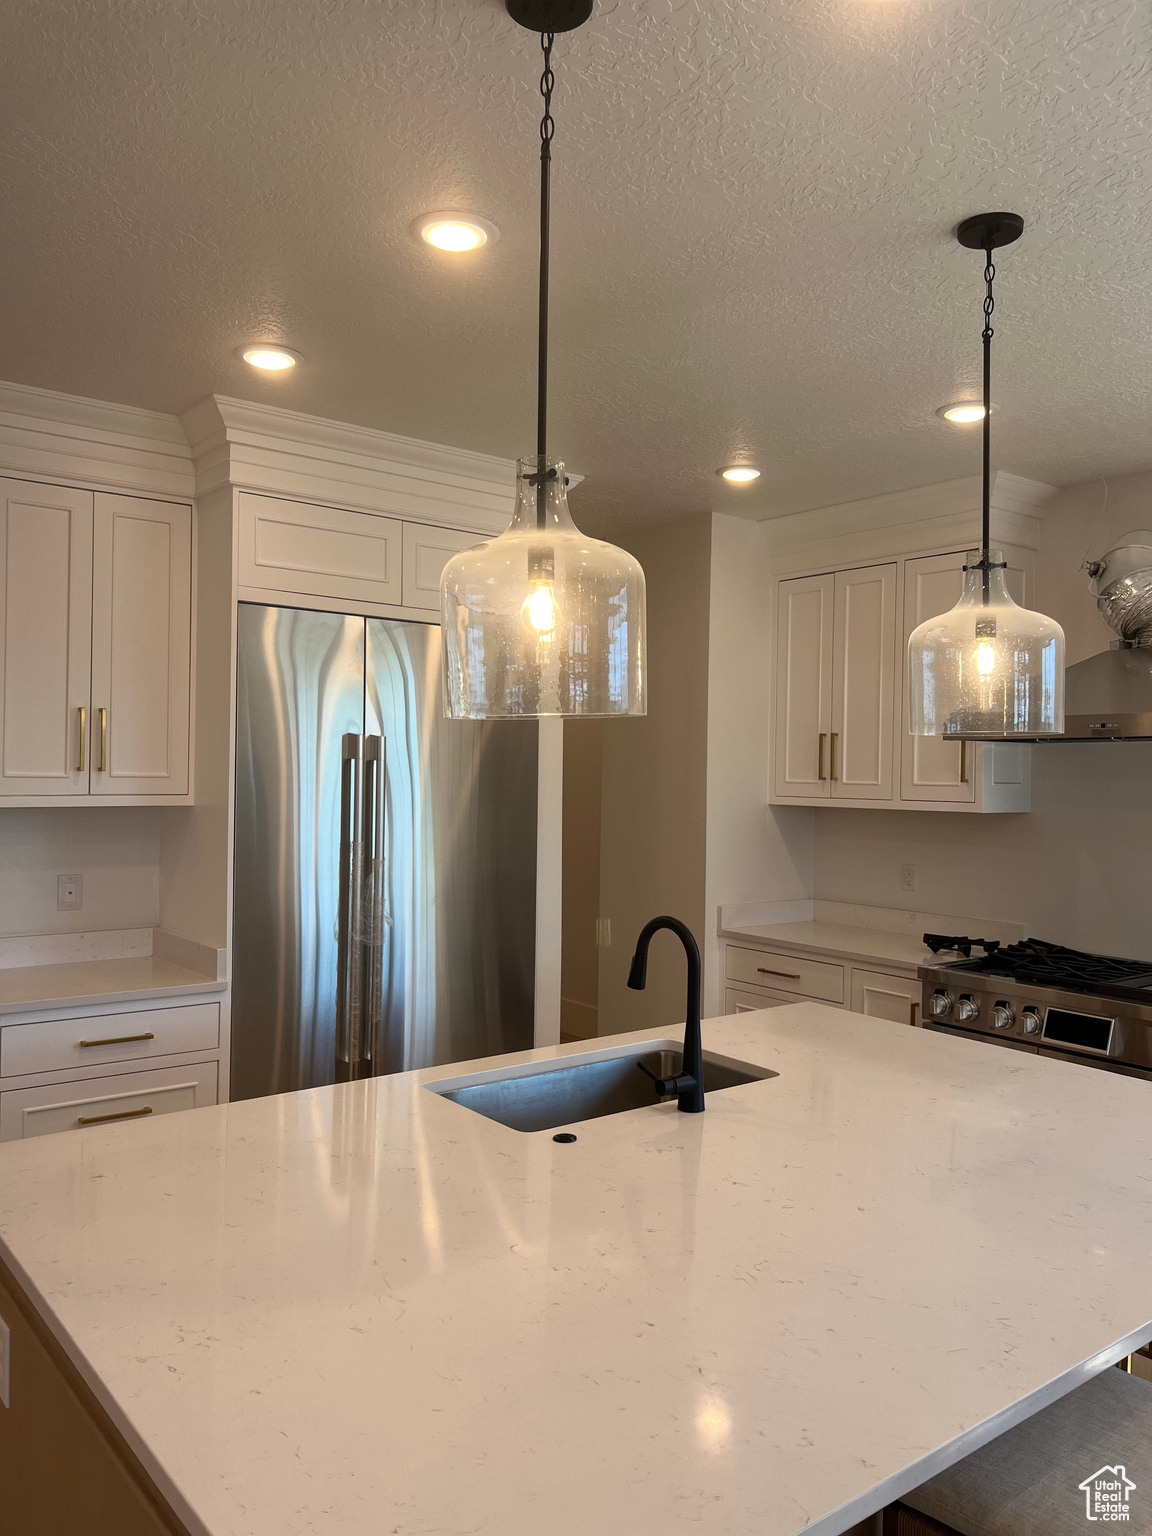 Kitchen with high quality fridge, white cabinets, pendant lighting, and sink